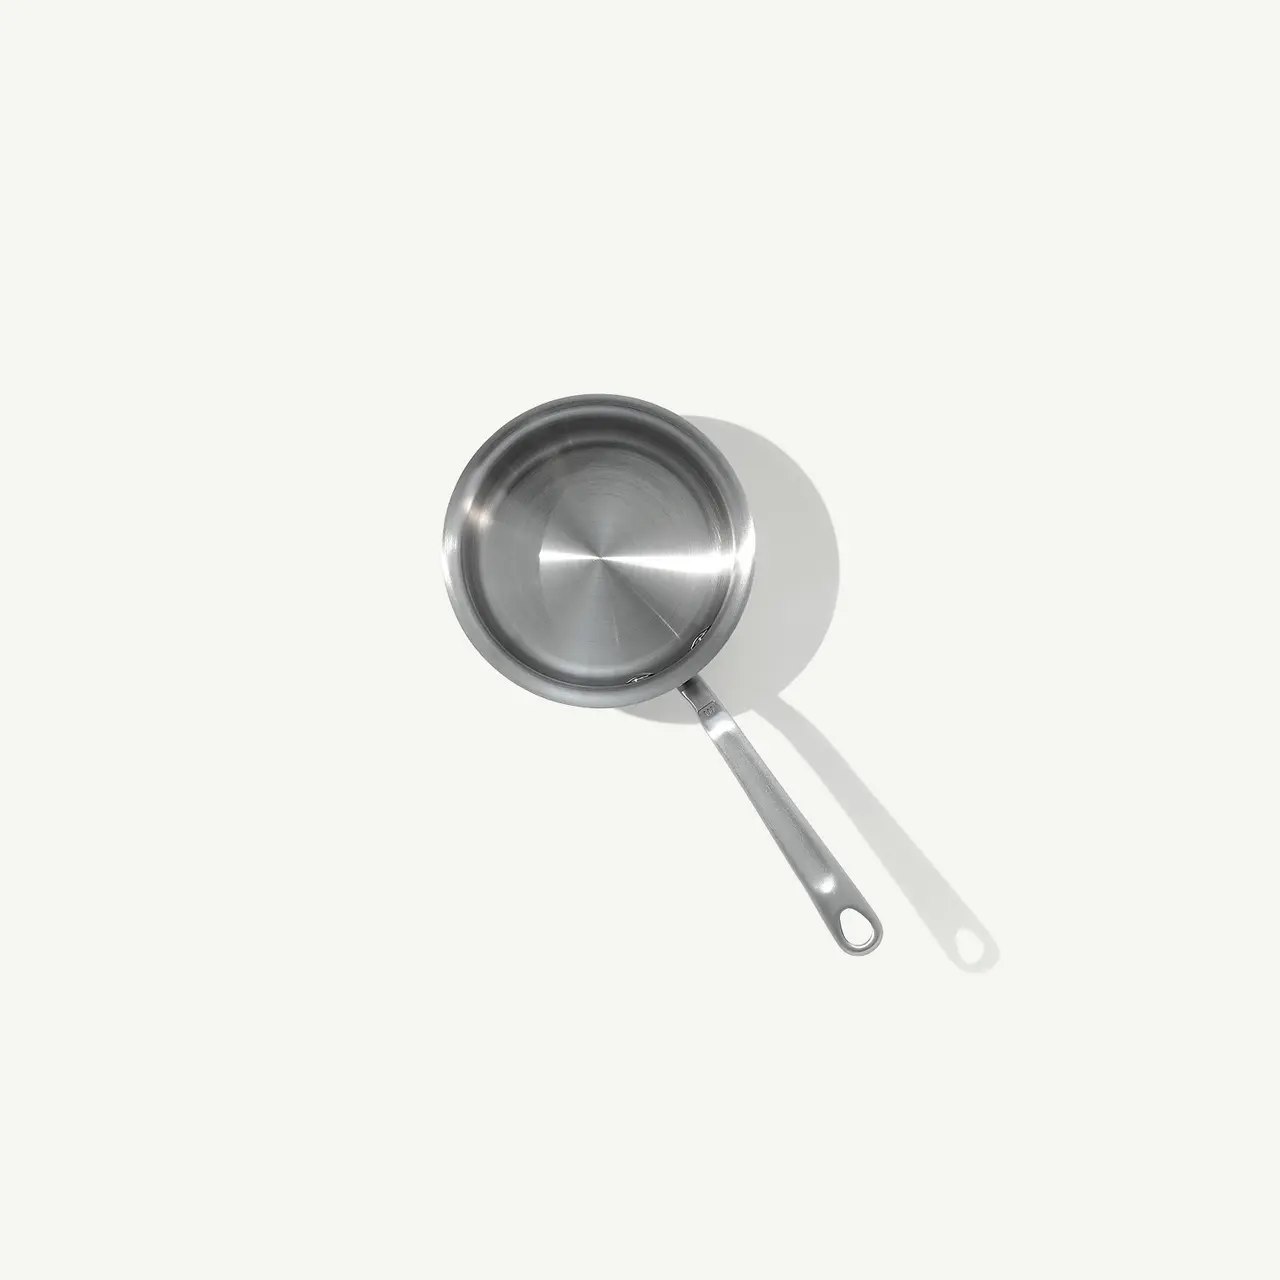 A stainless steel saucepan is centrally placed on a light background, casting a soft shadow beneath it.